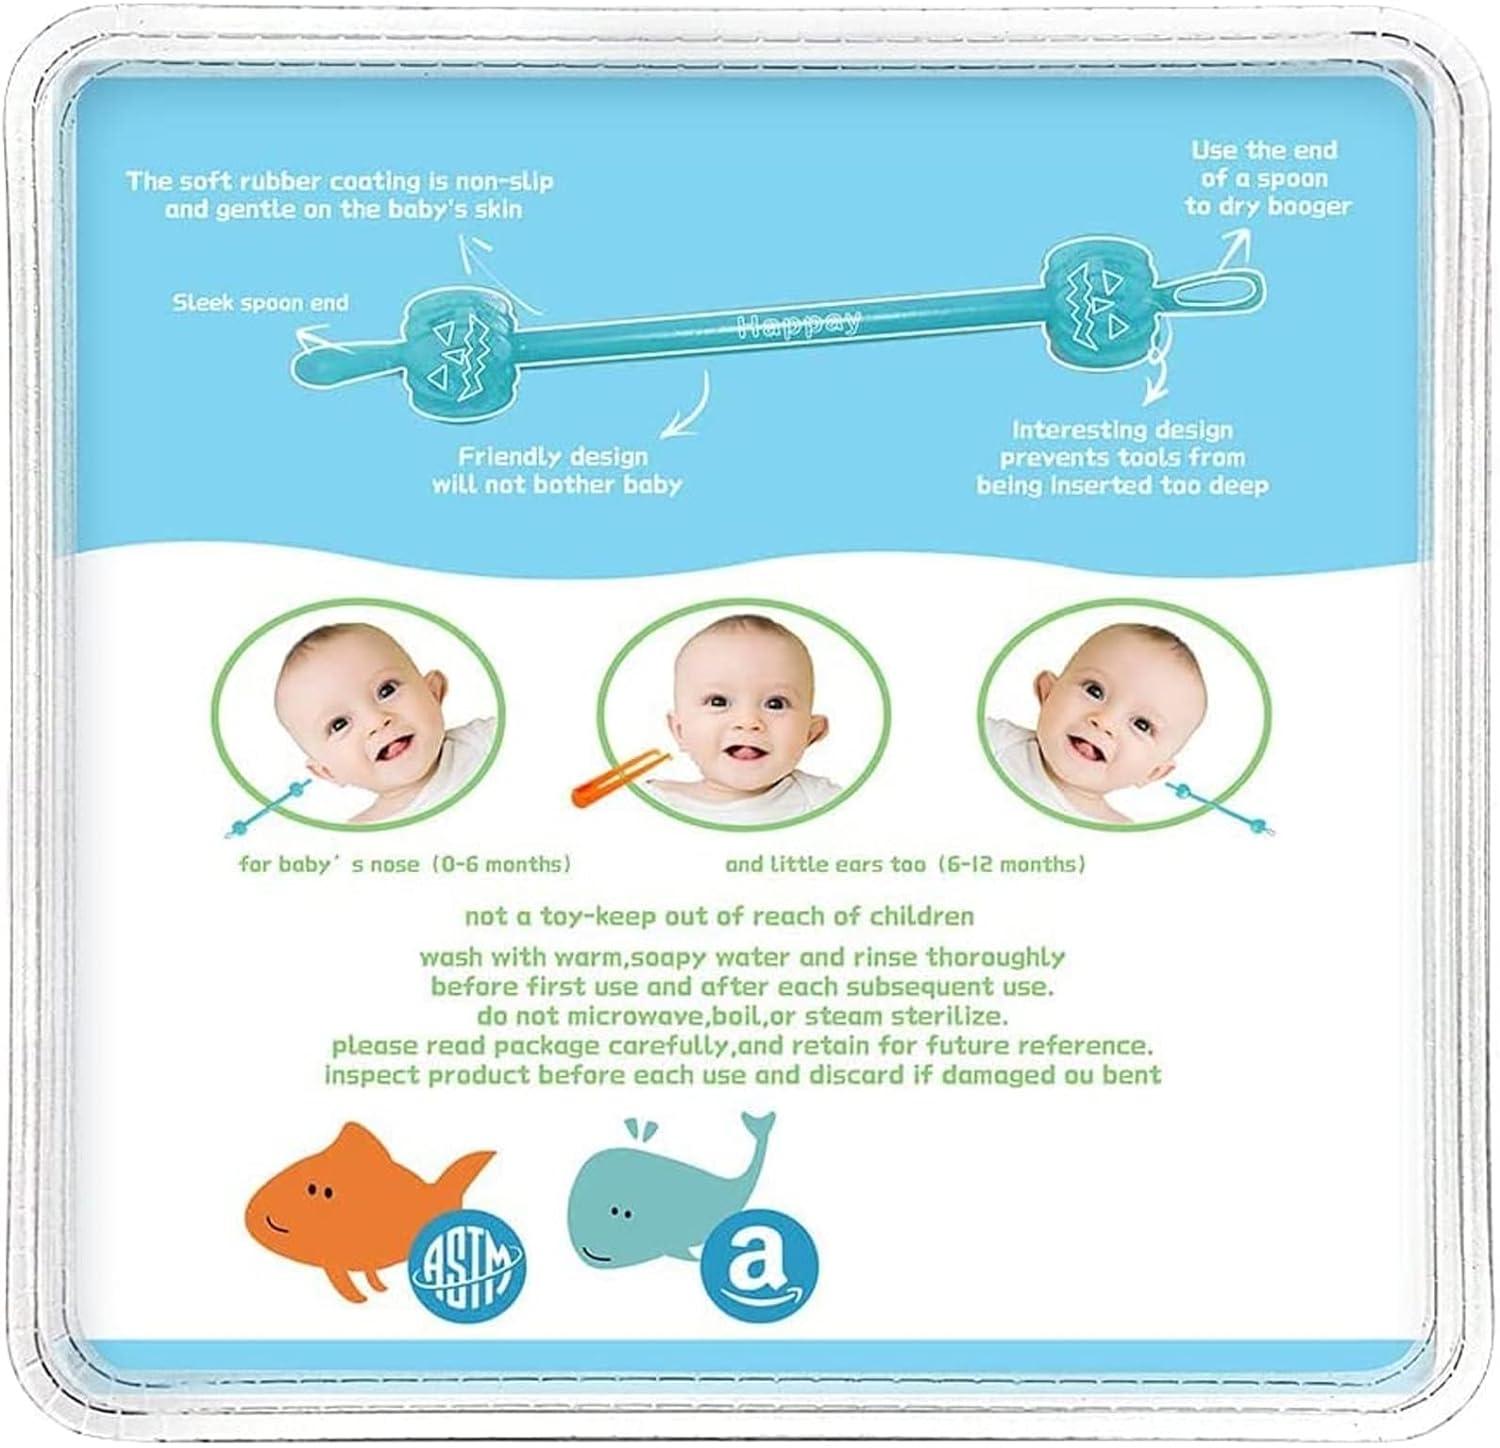 3-in-1 Nose, Nail + Ear Picker Baby Snot Sucker, Safely Clean Baby's  Boogers, Ear